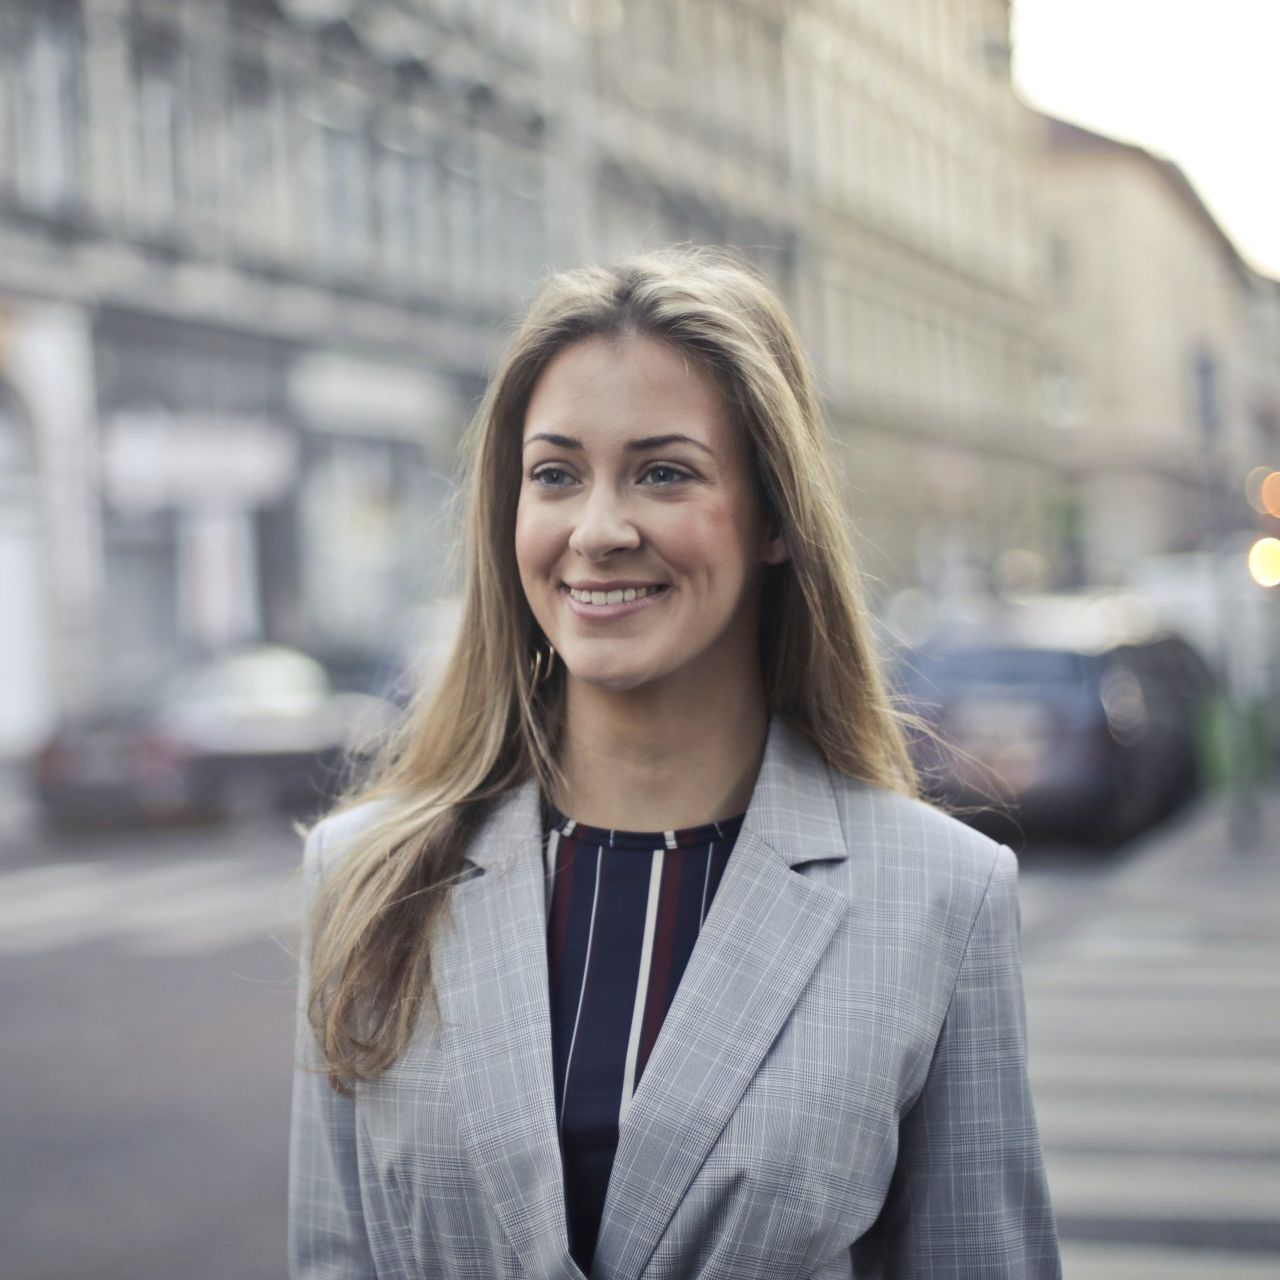 A woman in a suit is smiling while standing on a city street.